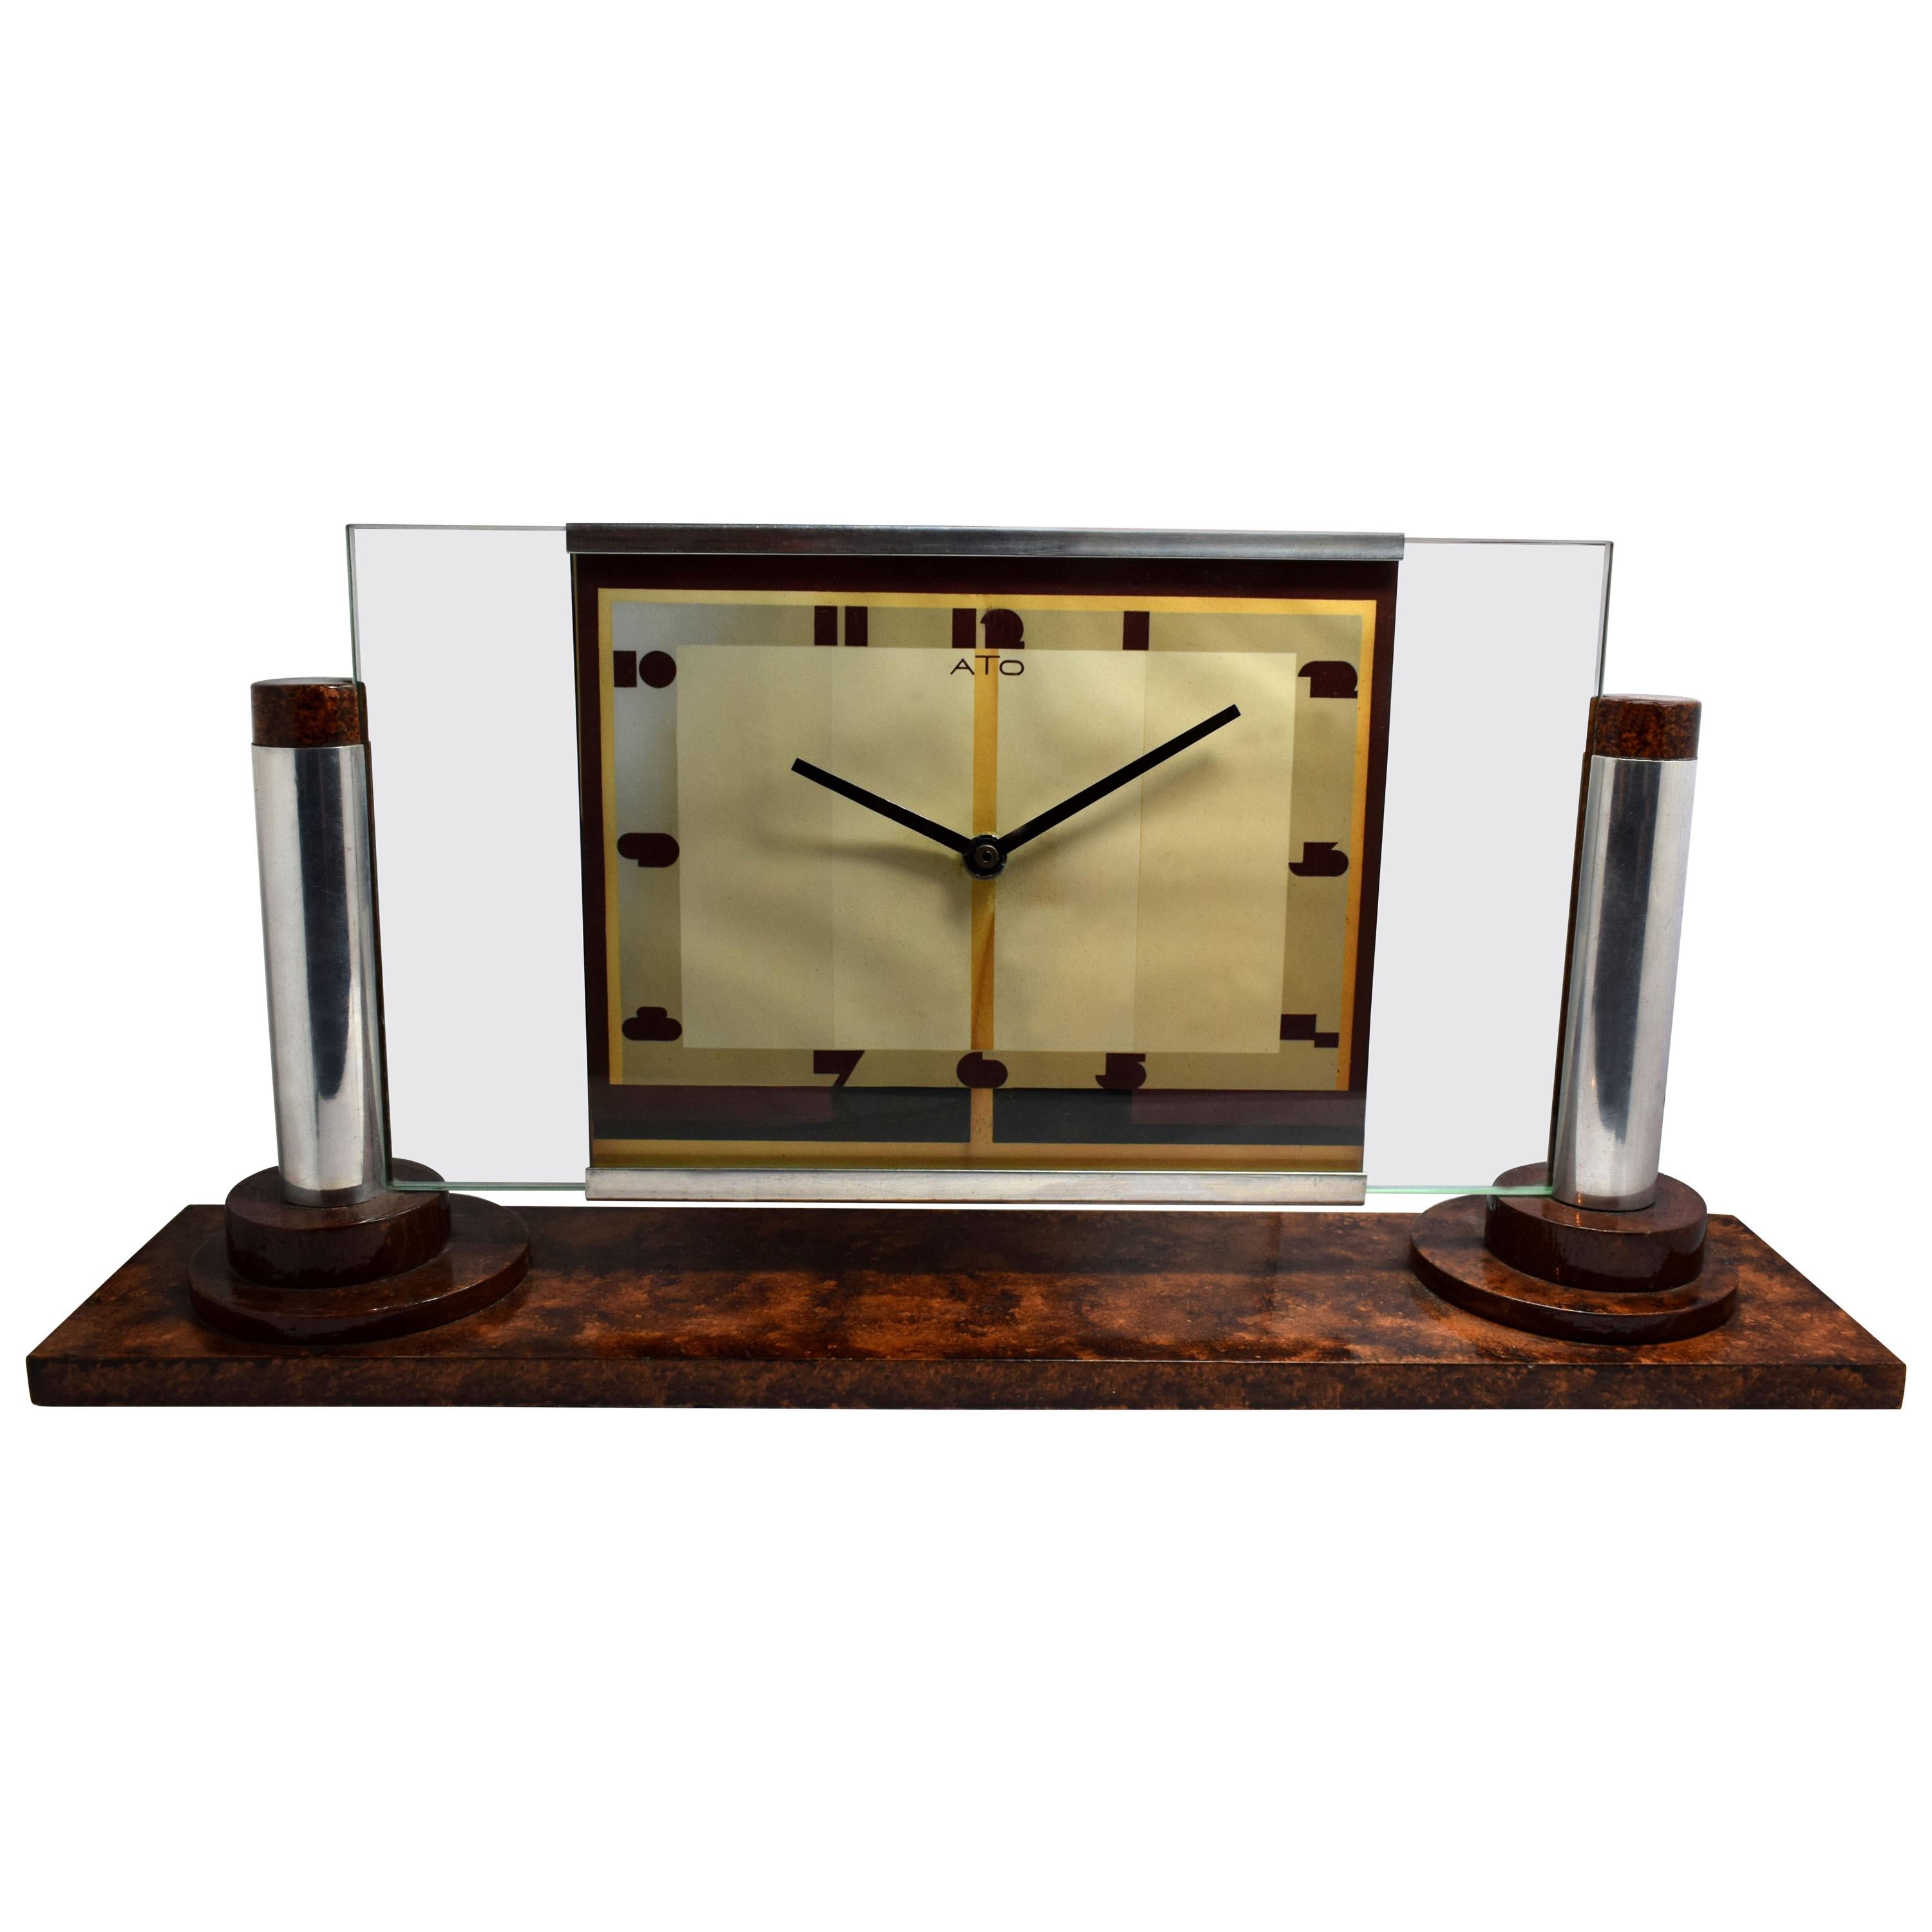 Large Art Deco Modernist Clock by ATO